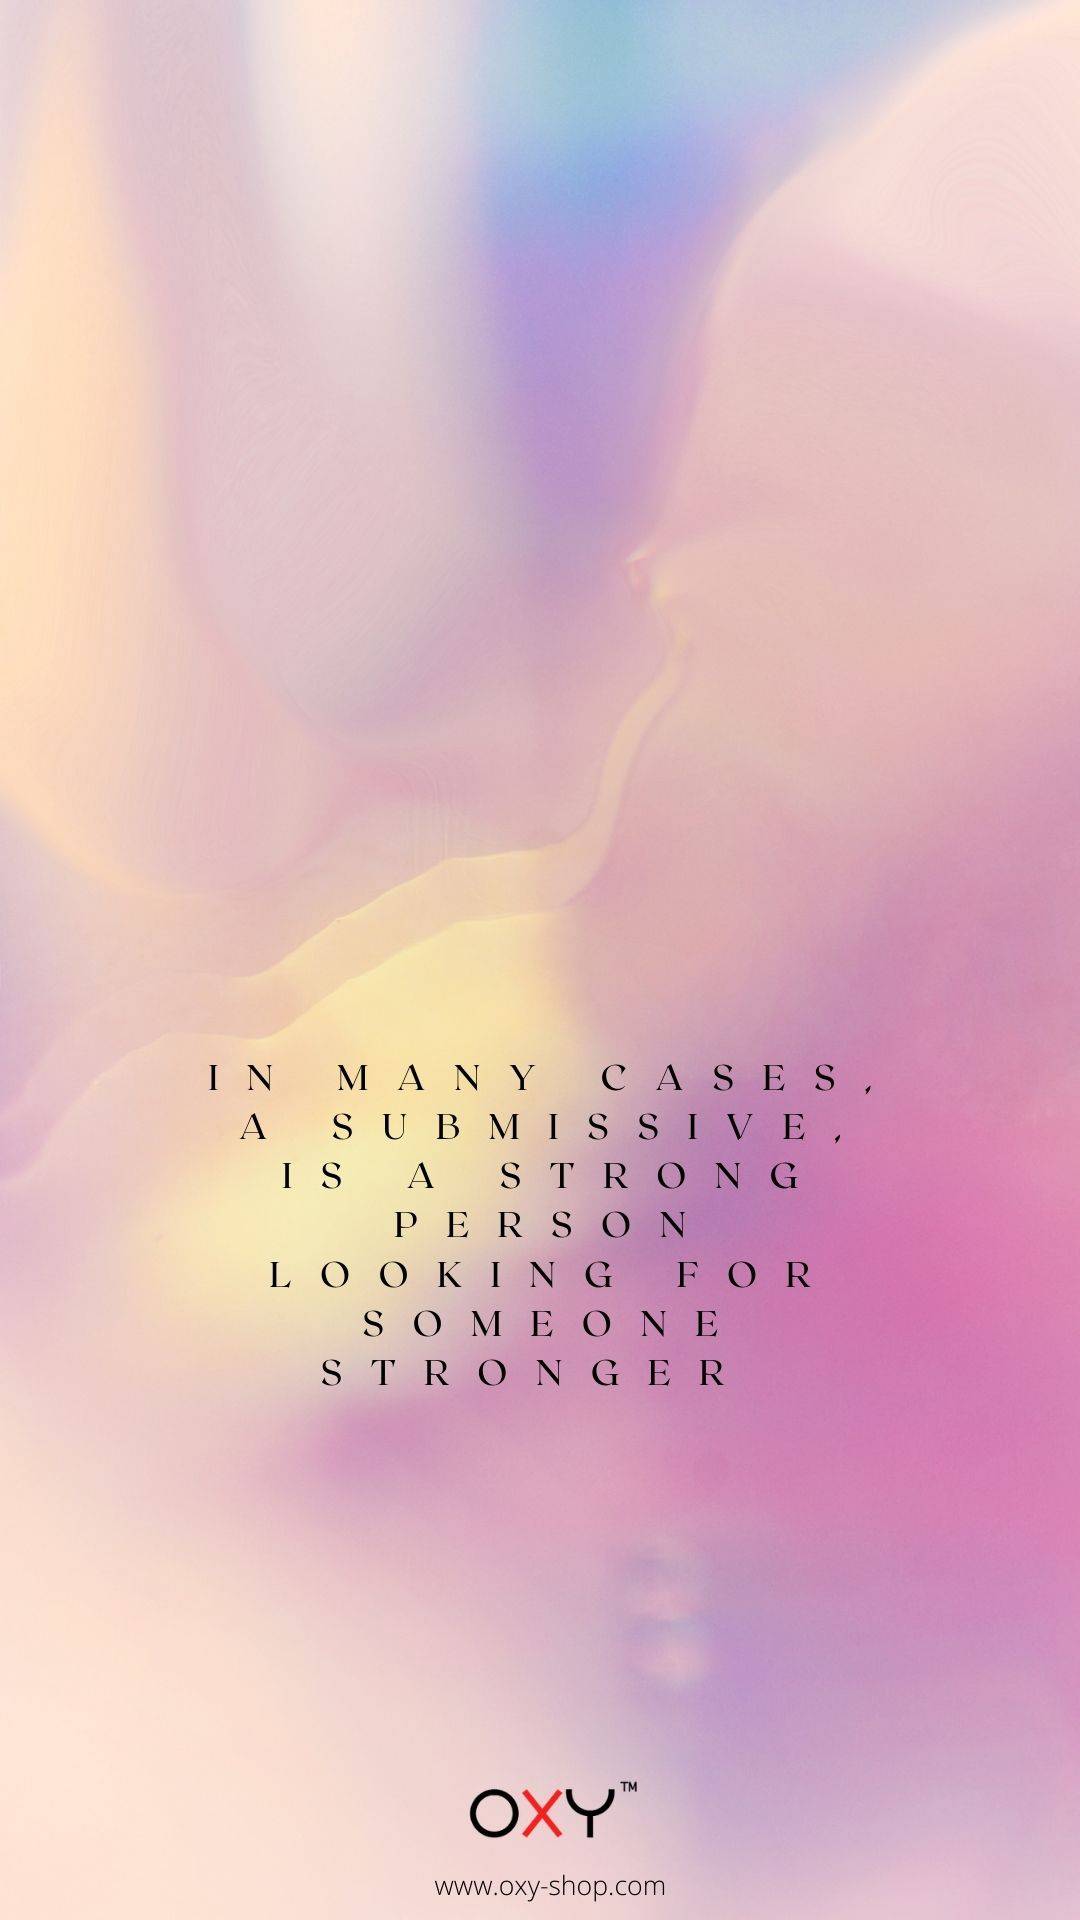 In many cases, a submissive is a strong person looking for someone stronger. - BDSM wallpaper